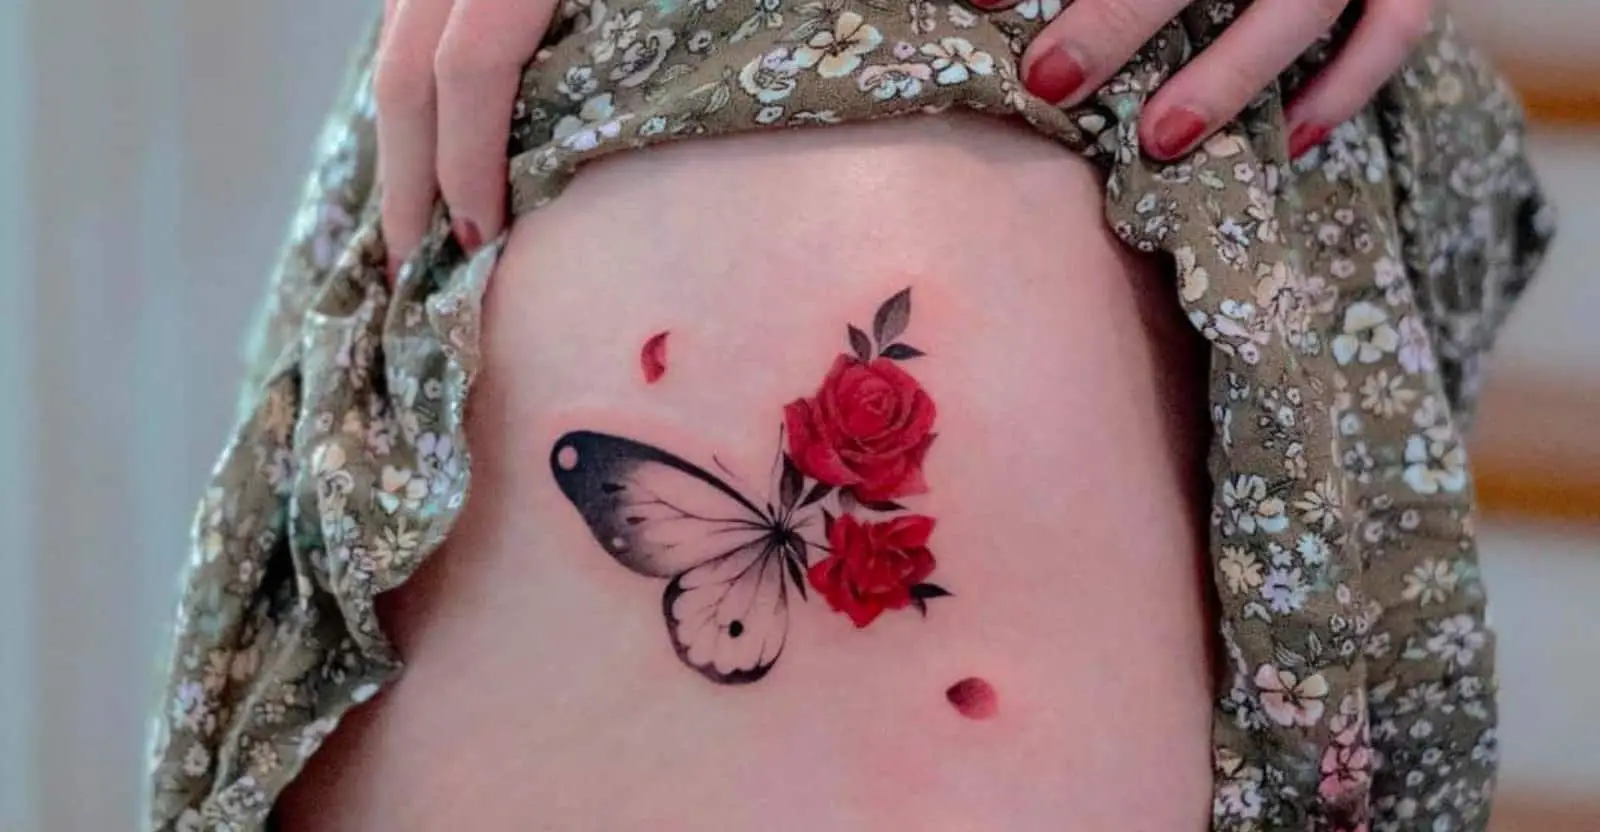 Rose tattoos: meaning, placement, ideas - Our guide • Tattoodo